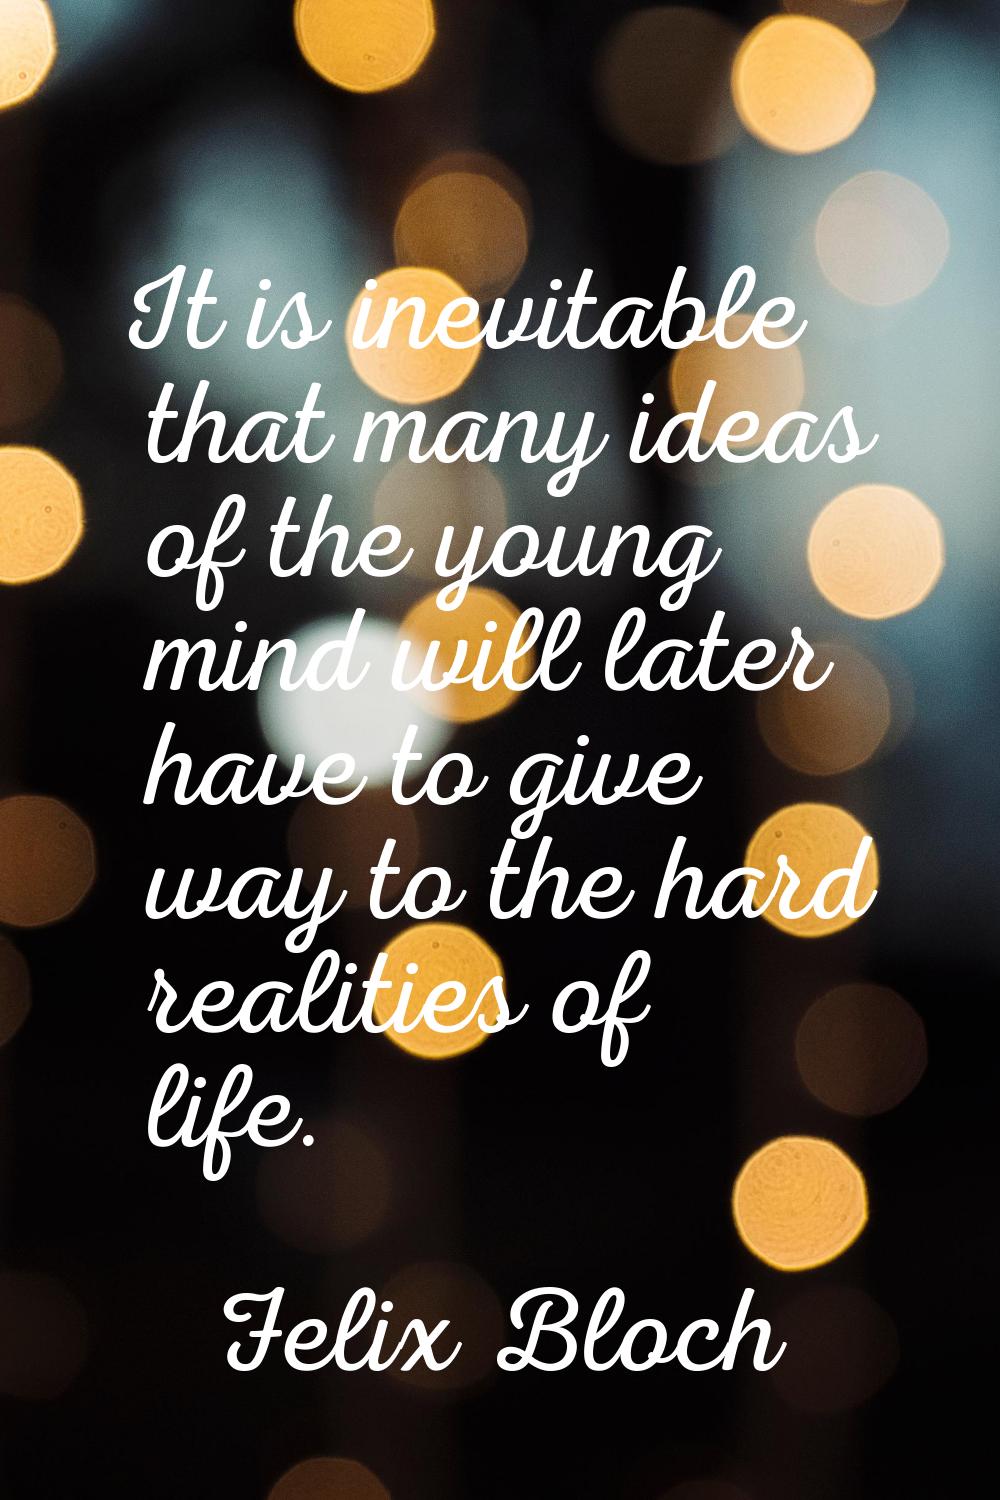 It is inevitable that many ideas of the young mind will later have to give way to the hard realitie